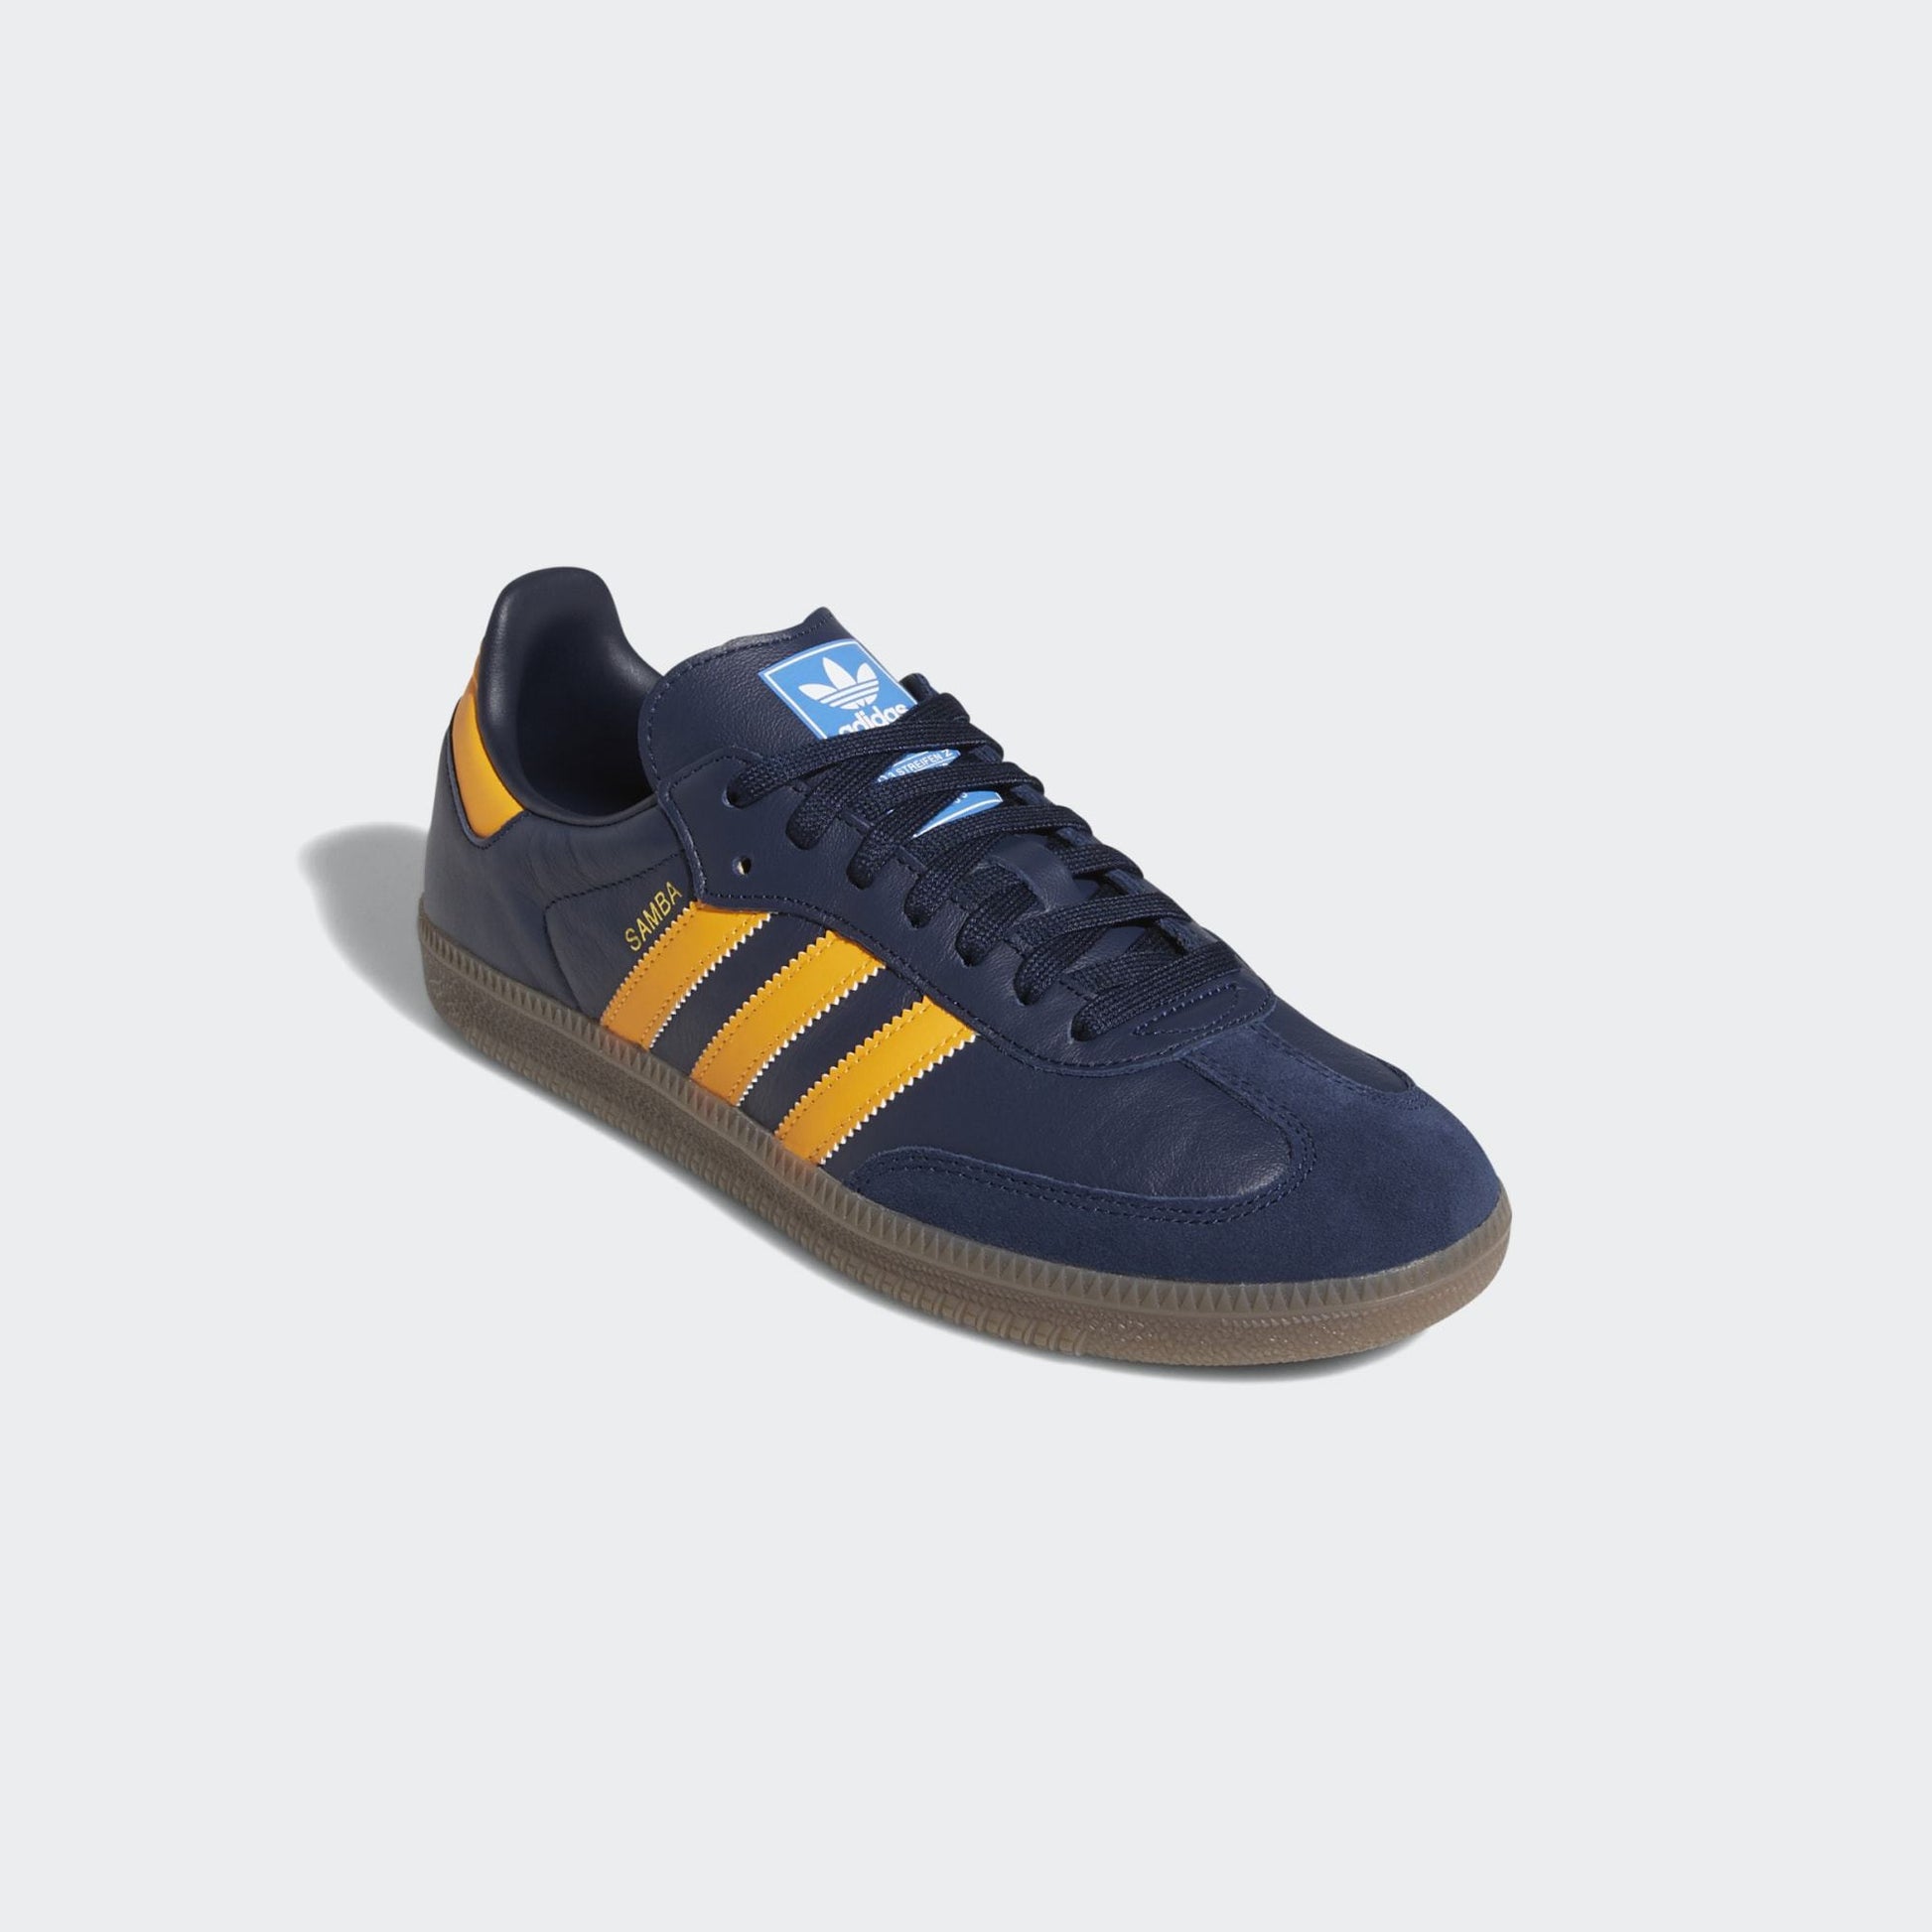 SAMBA OG SHOES COLLEGIATE NAVY / REAL GOLD / CLOUD WHITE - Discount Store